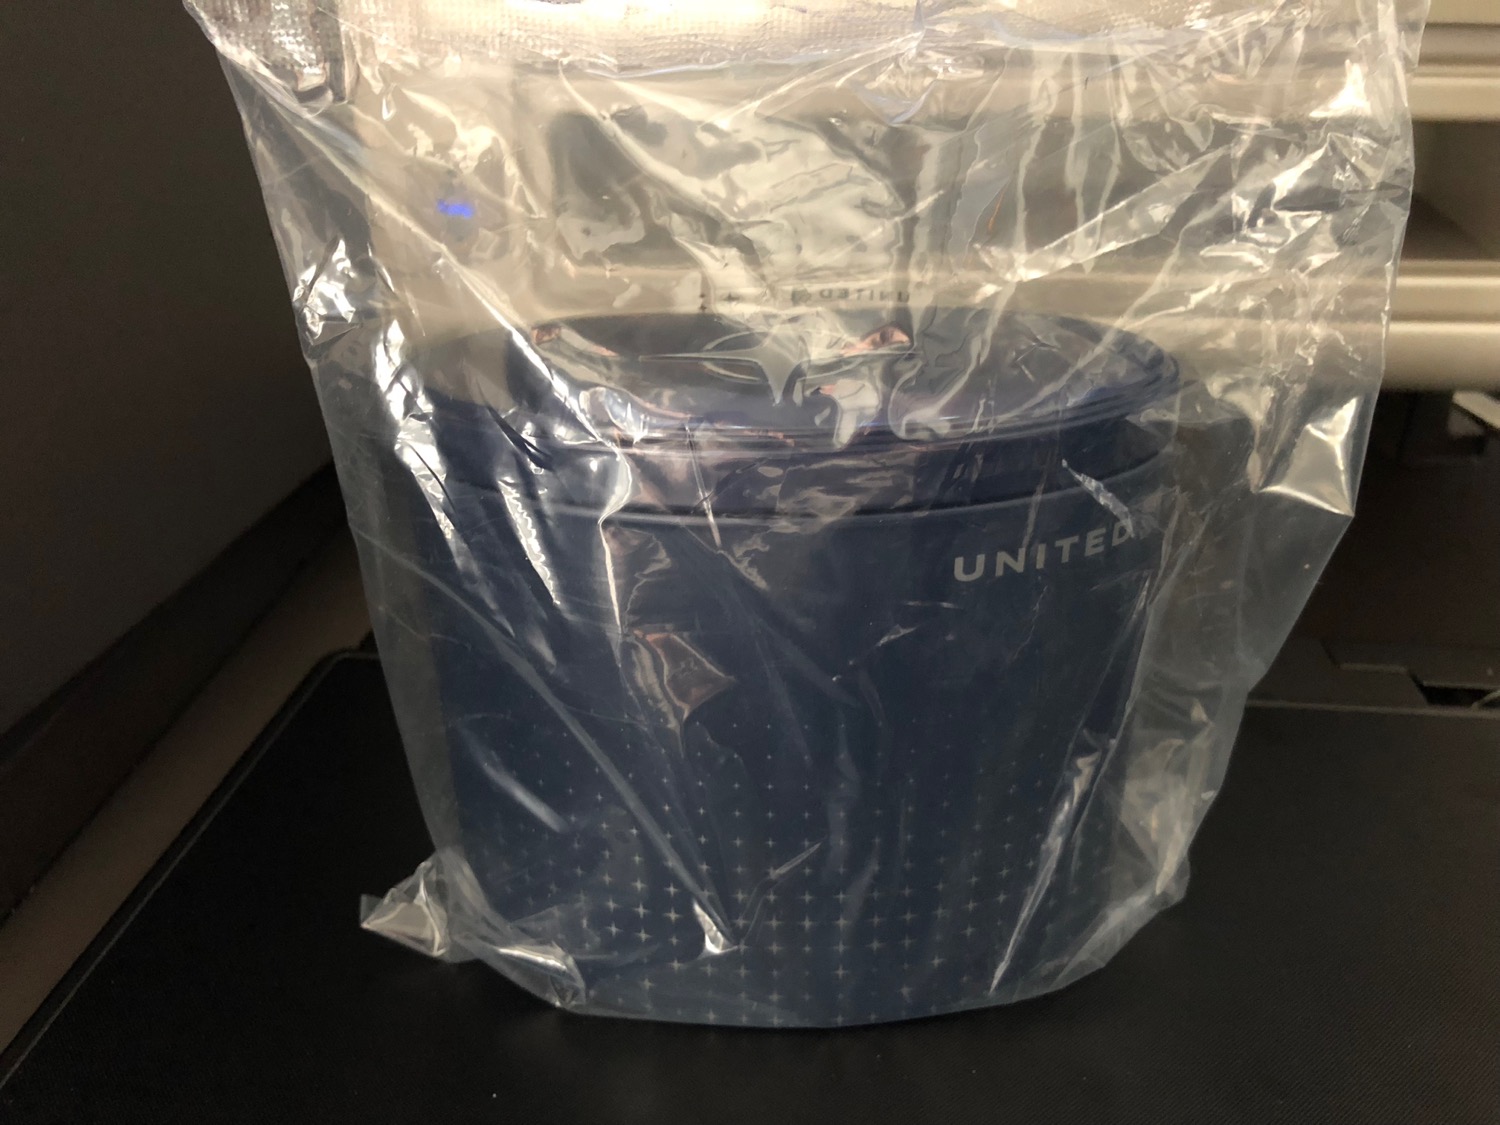 a plastic bag with a blue container inside